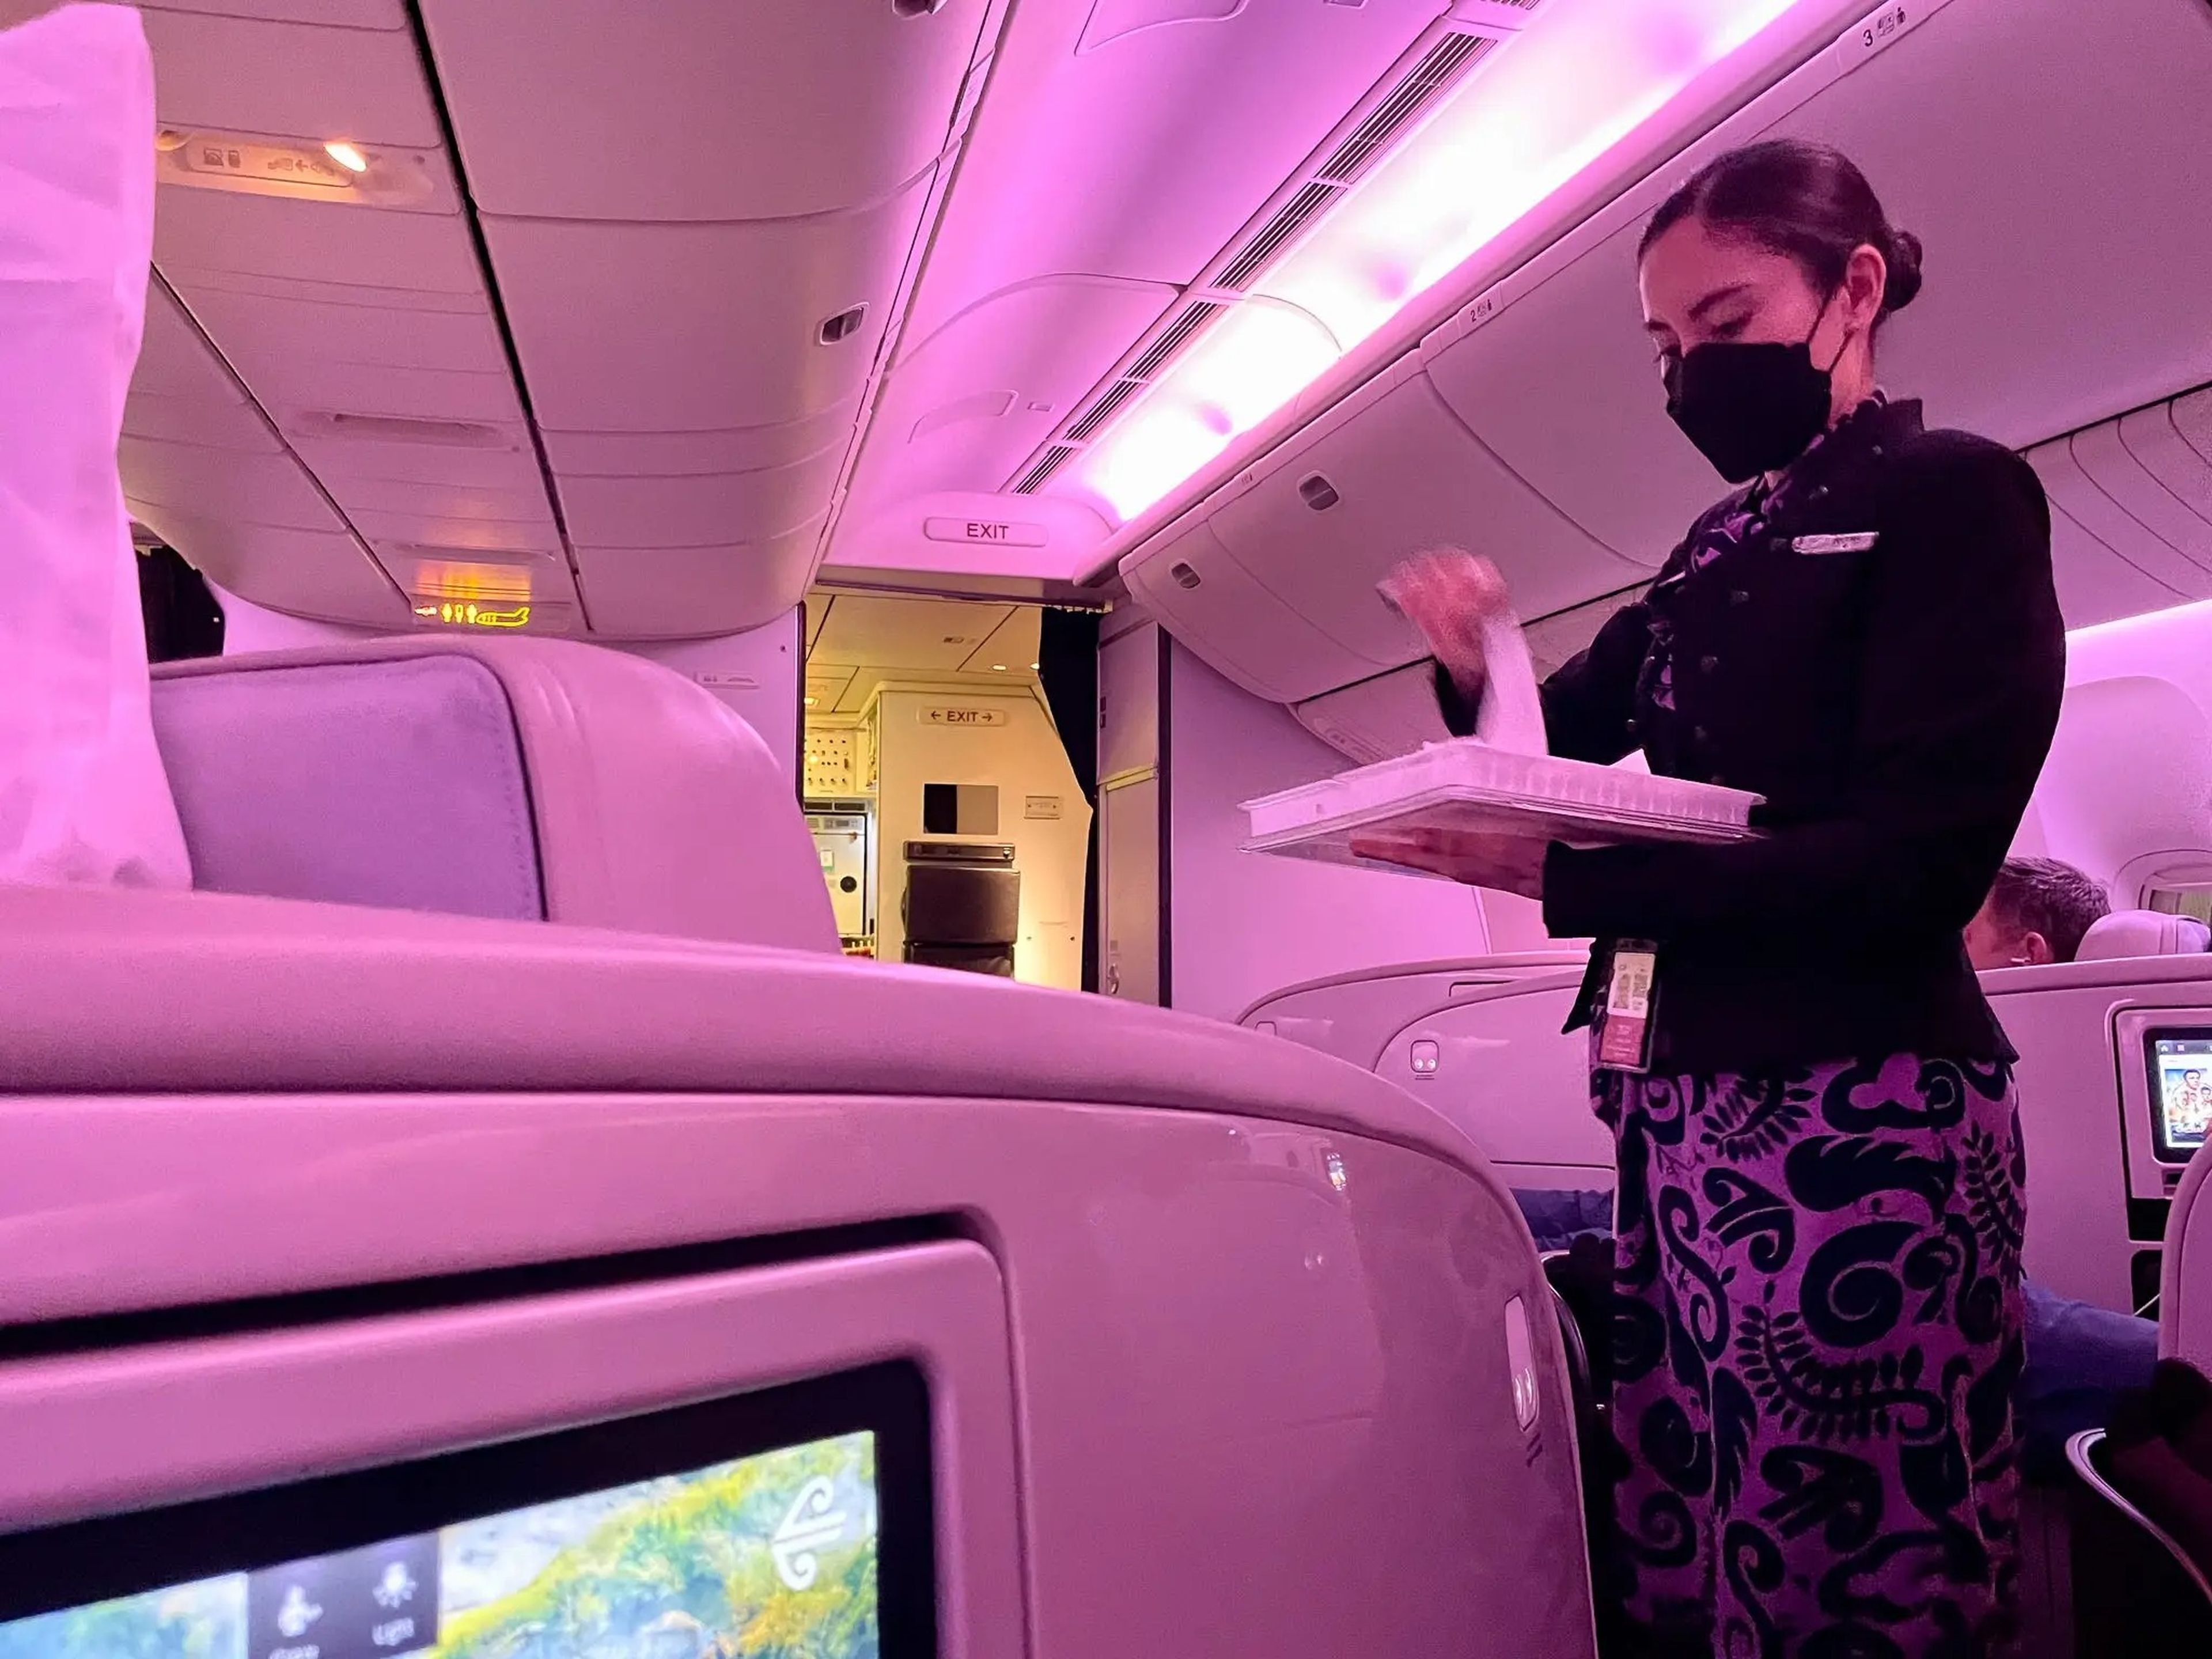 An Air New Zealand flight attendant passed out warm towels to business-class travelers.